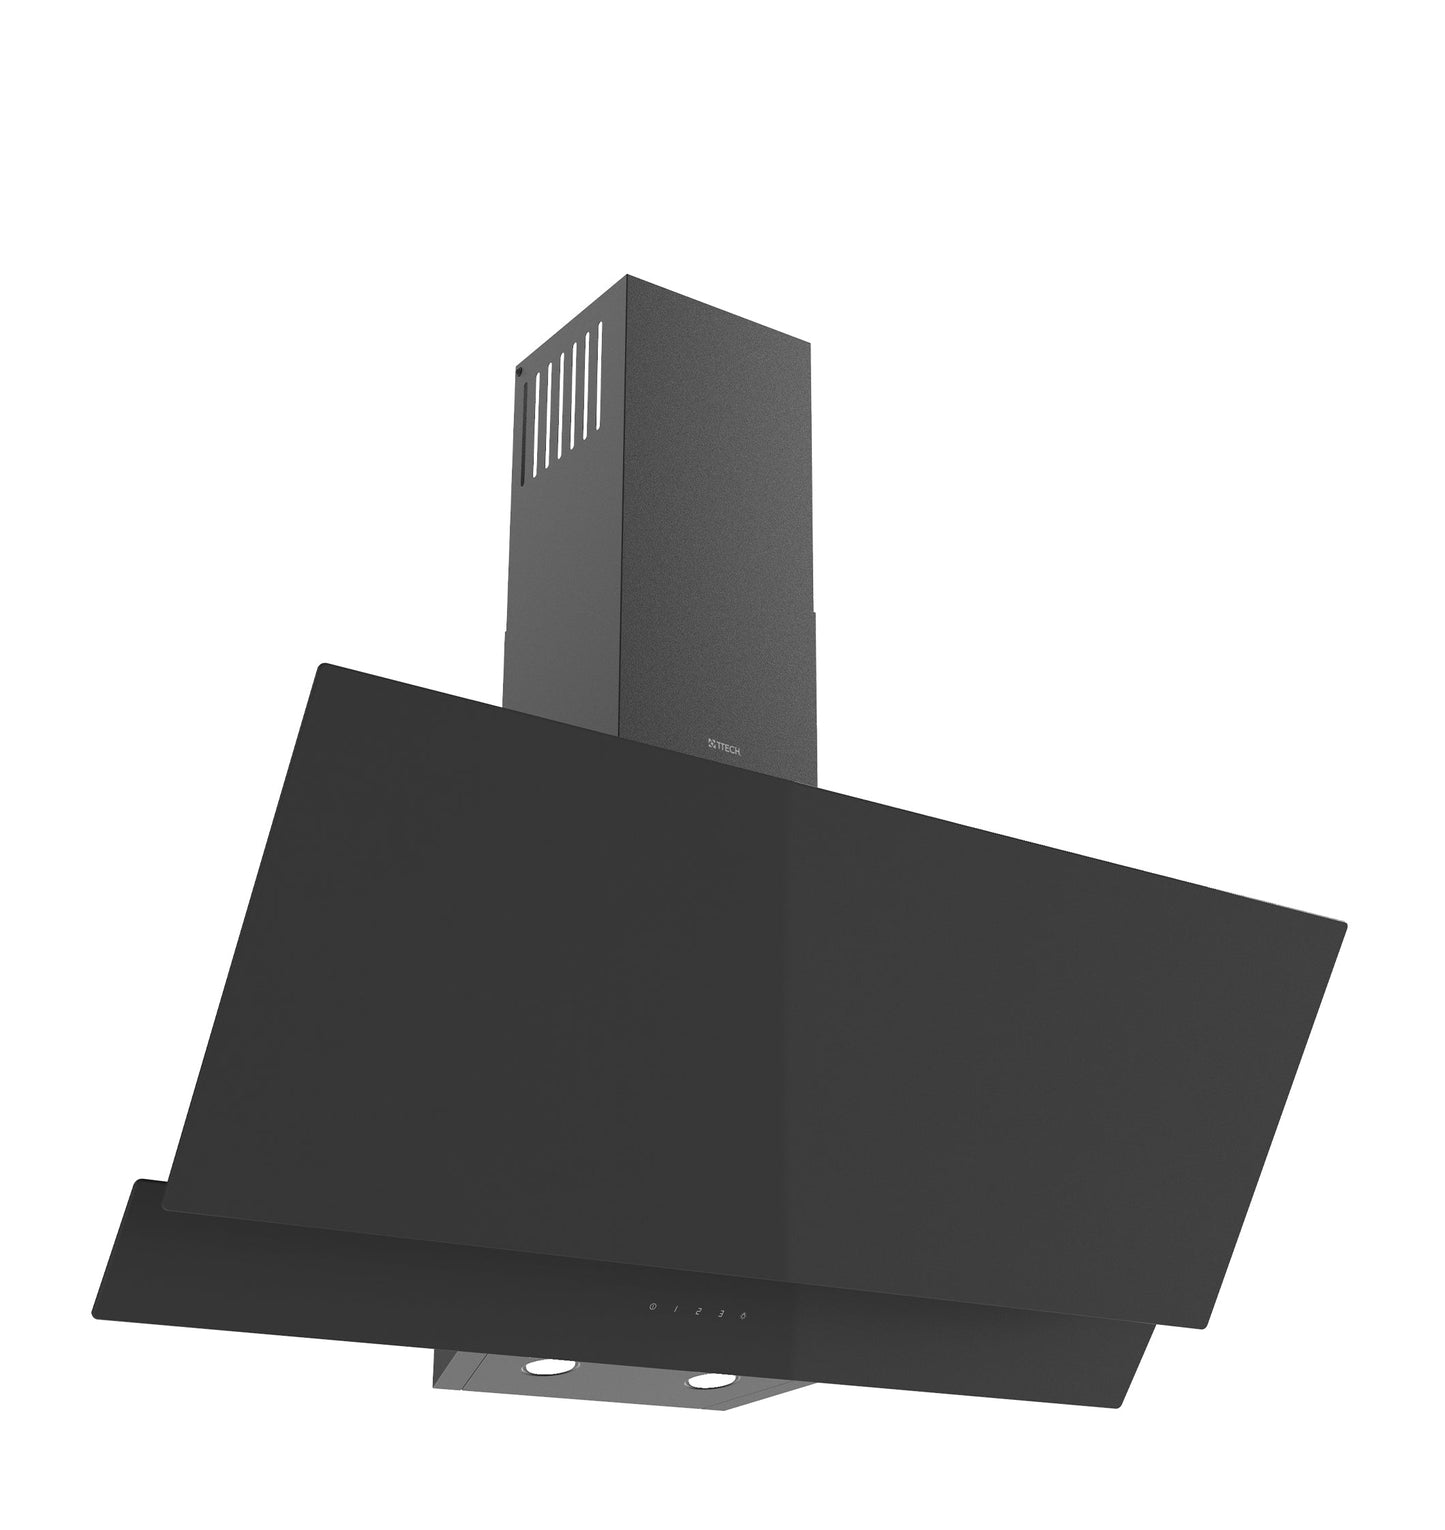 T-TECH 90CM BIG BODY CHIMNEY HOOD, ANGLED CURVED BLACK DOUBLE GLASS, TOUCH CONTROL, DOUBLE VENTED SYSTEM, WHITE COLOR 2 CHIMNIES, 2 PCS. LED LAMP - AG902BG50TC